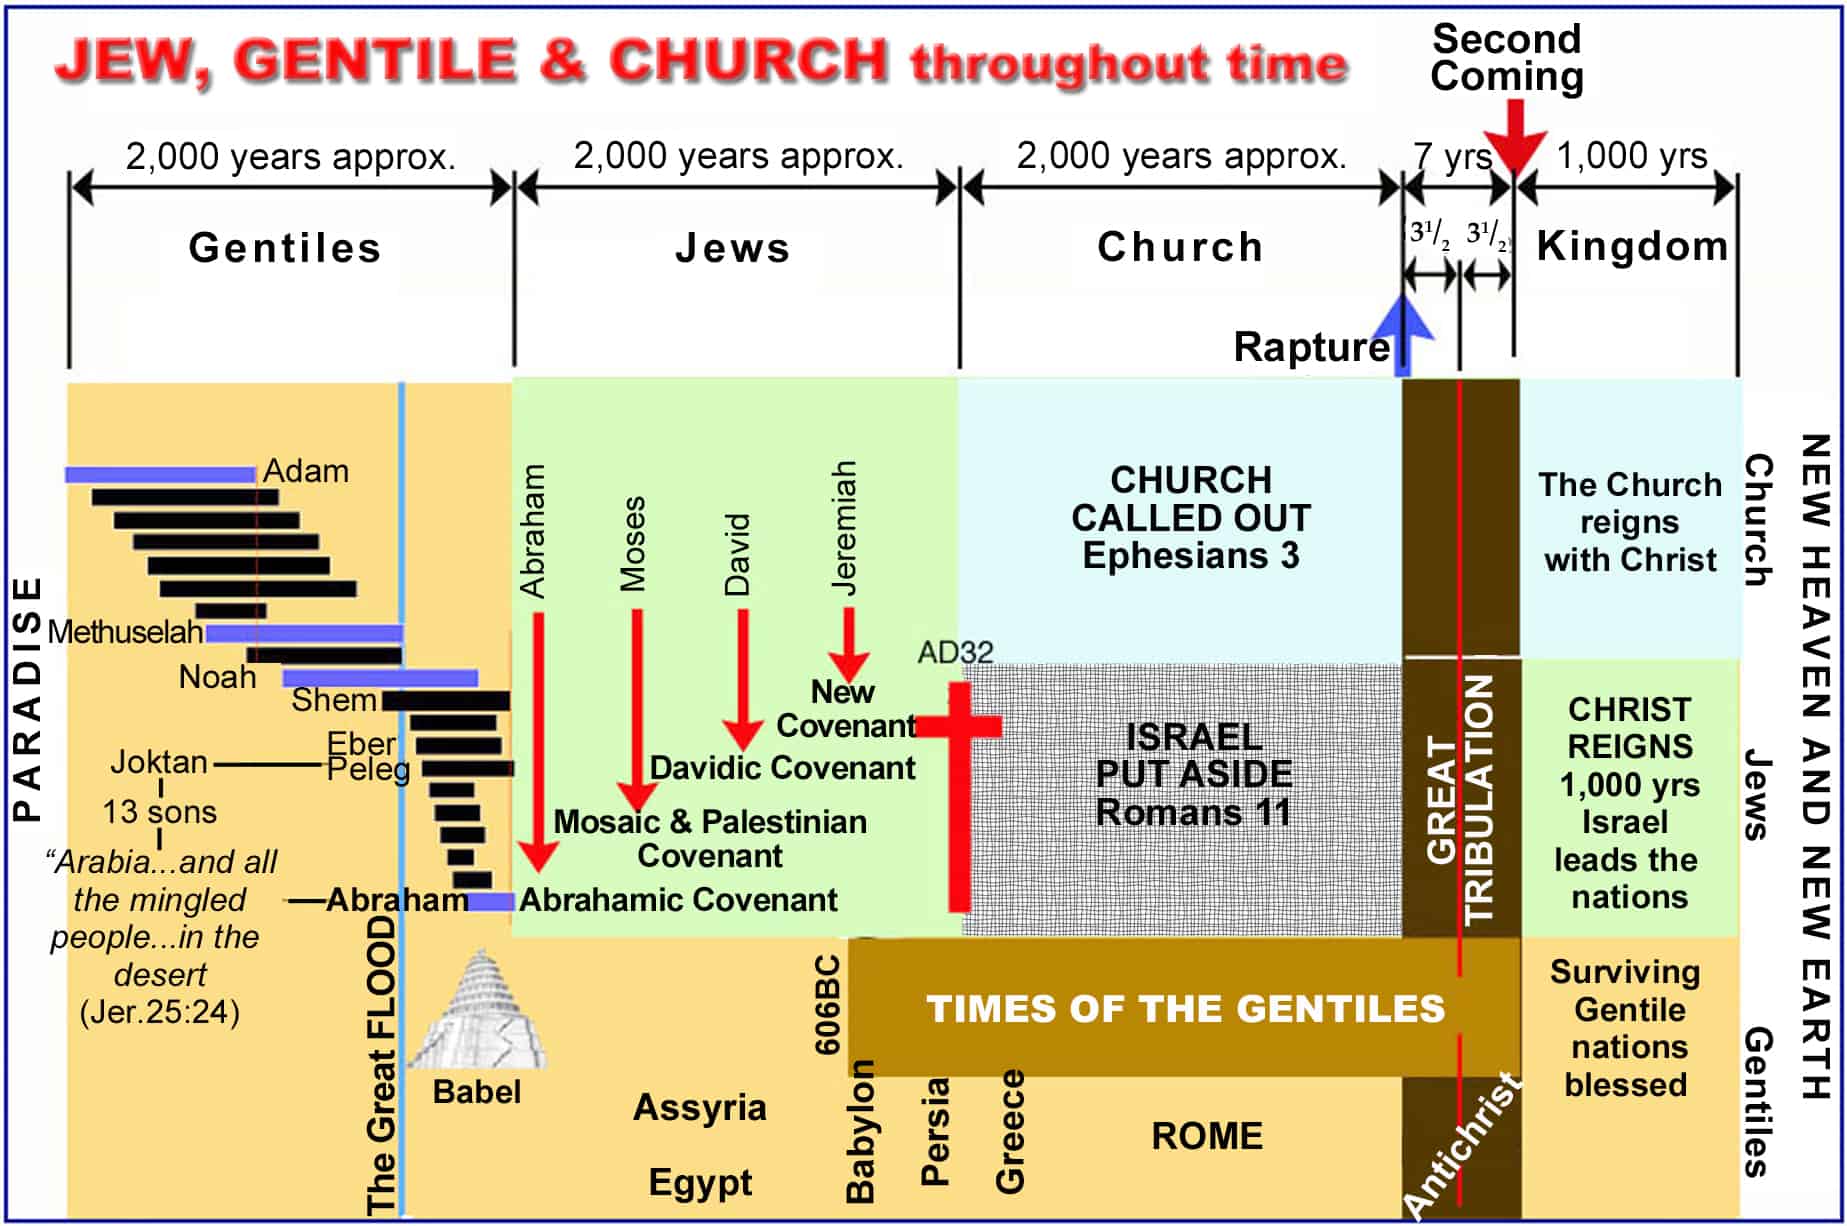 JEW GENTILE AND CHURCH IN HISTORY